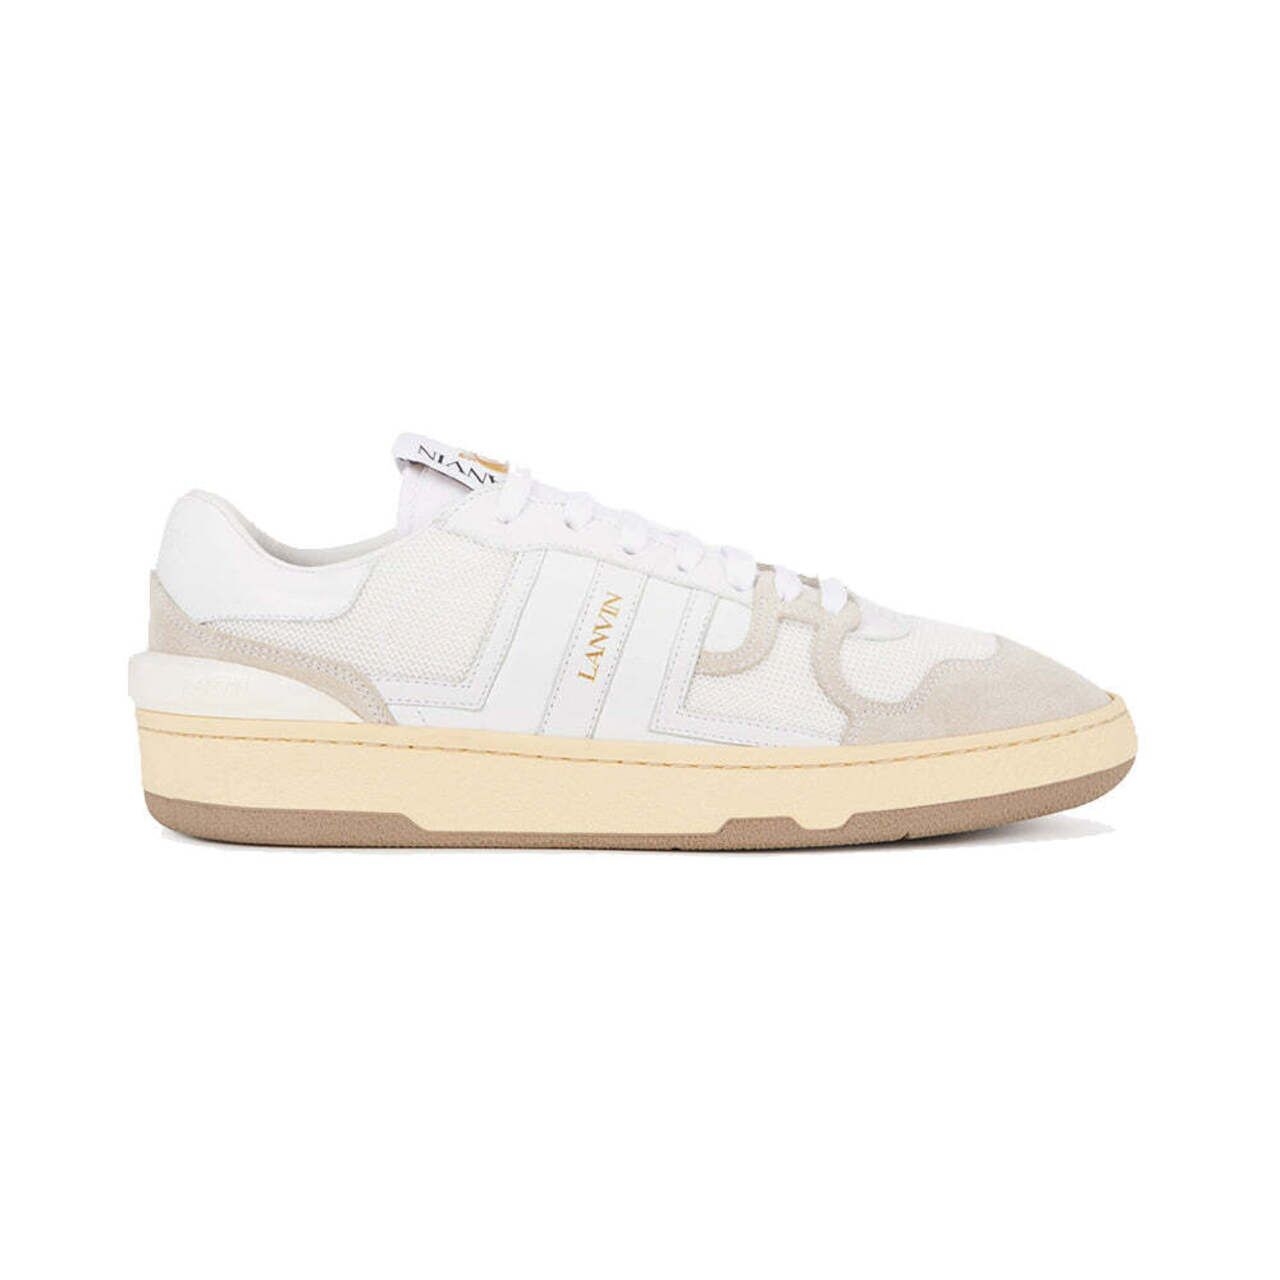 Lanvin Clay Low-top Sneakers Leathers and Mesh All White Men